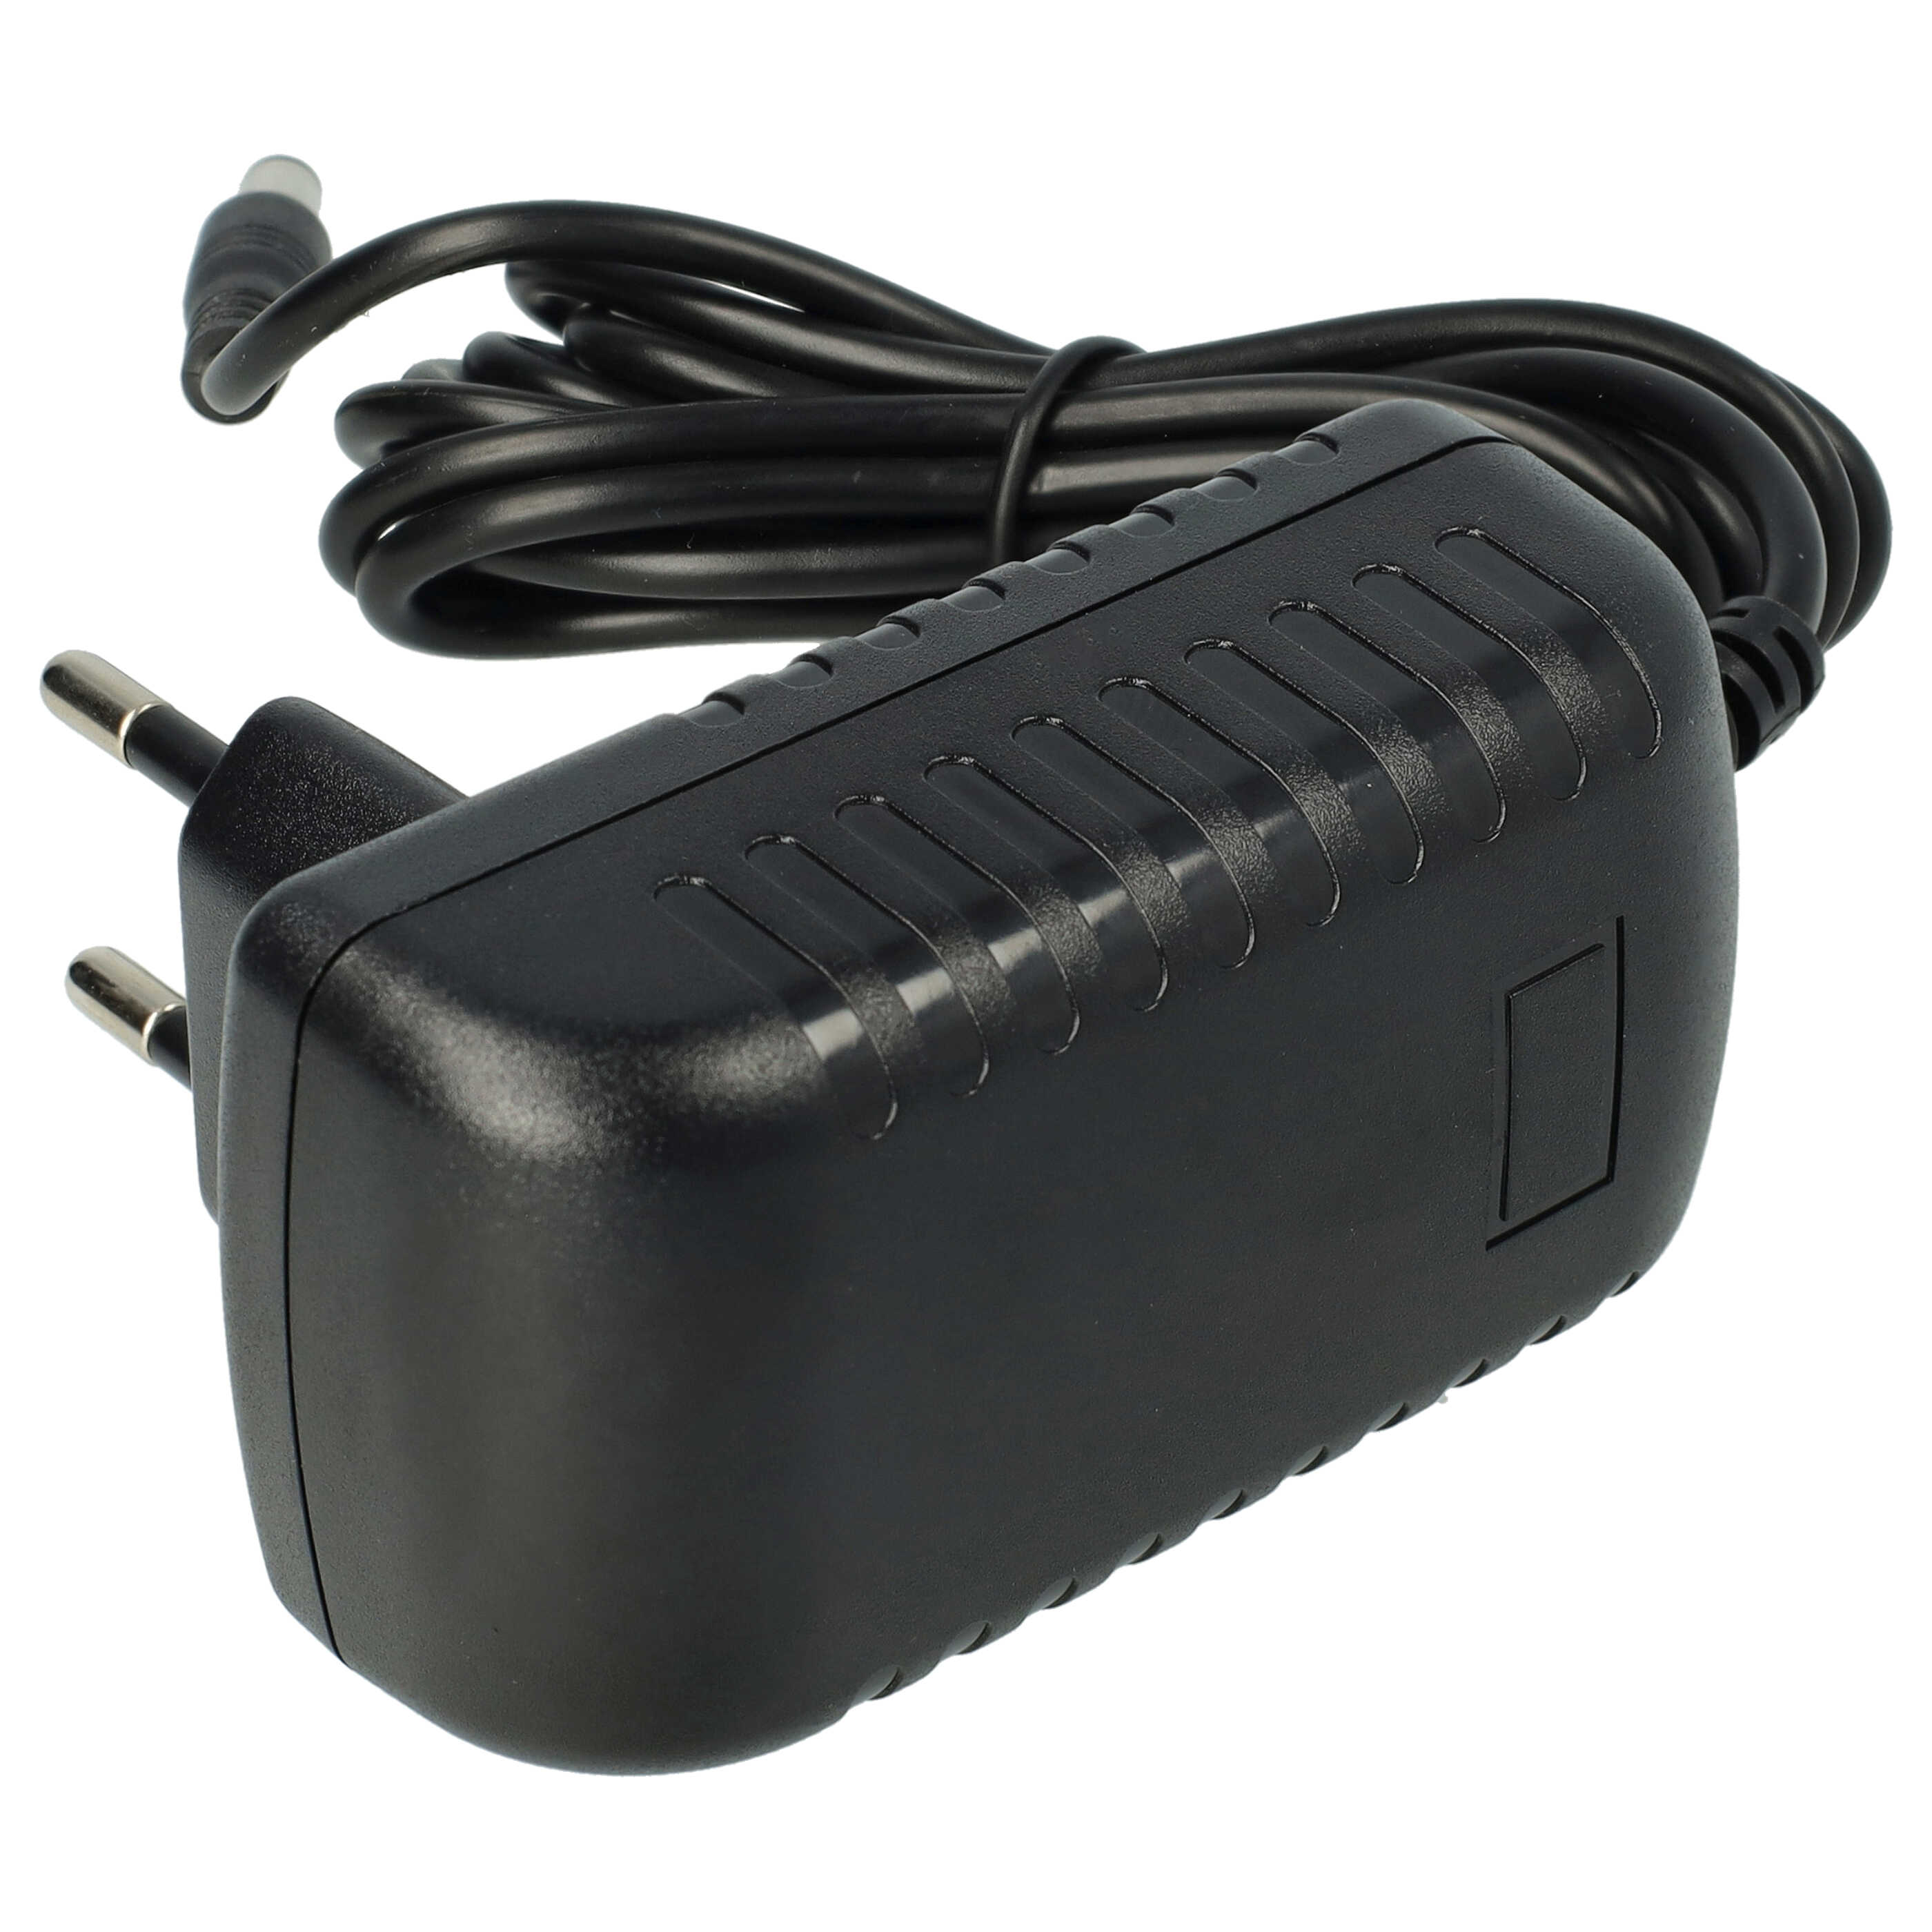 Mains Power Adapter replaces Brother AD-24, AD-30, AD-24EU, AD-24ES, AD-24E, AD-20 for Electric Devices -